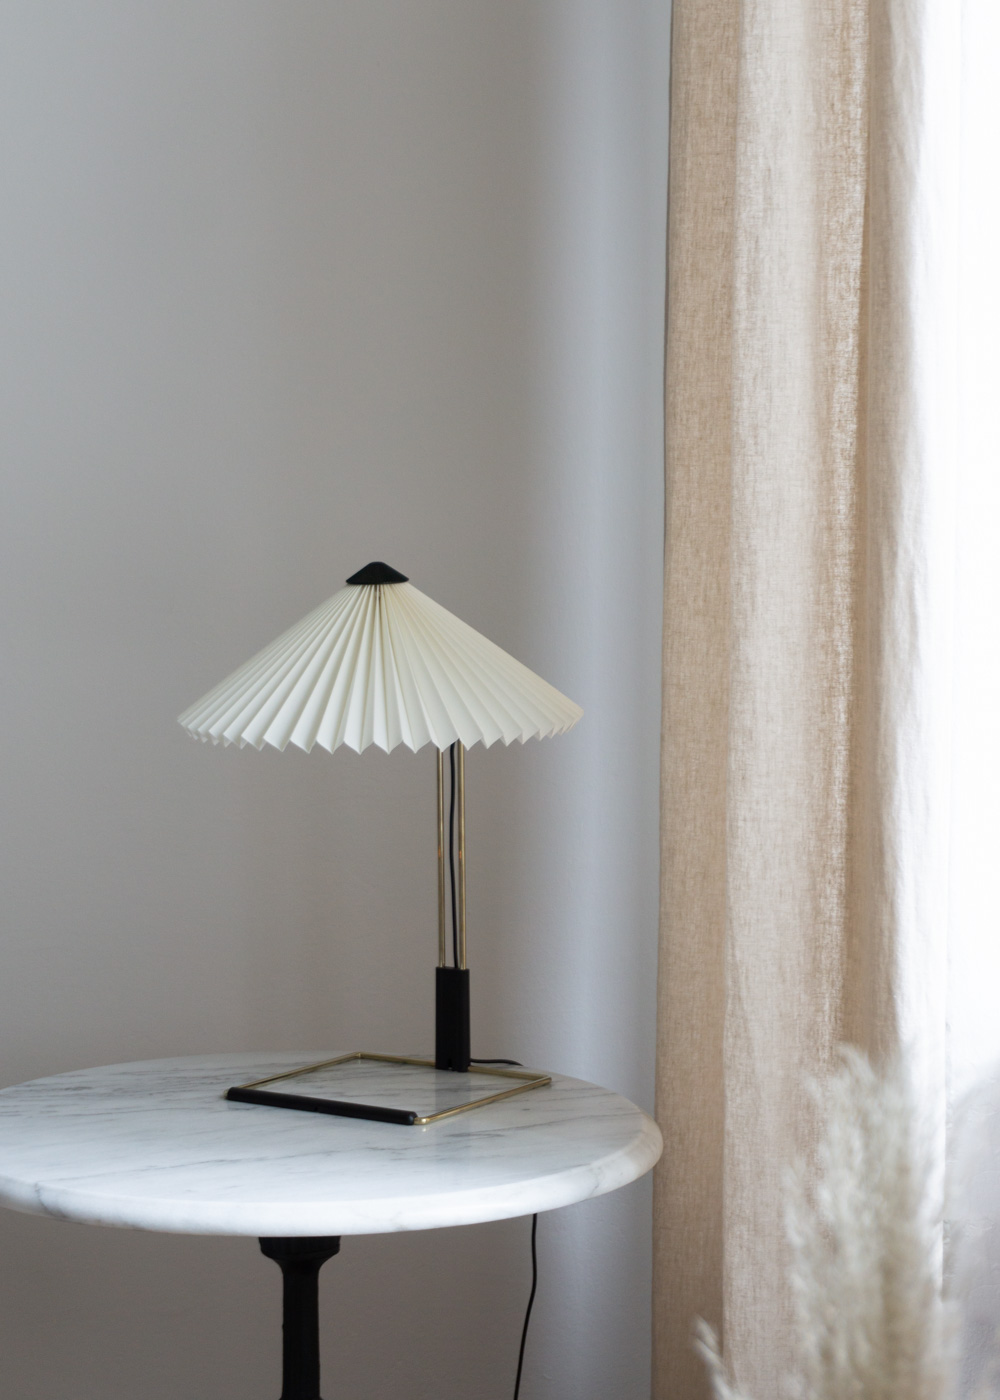 Hay Matin Lamp, Marble Table, Neutral Curtains, Beige Home - Neutral Home, Scandinavian Aesthetic, Berlin Apartment, White Interior, Calm Lighting | RG Daily Blog